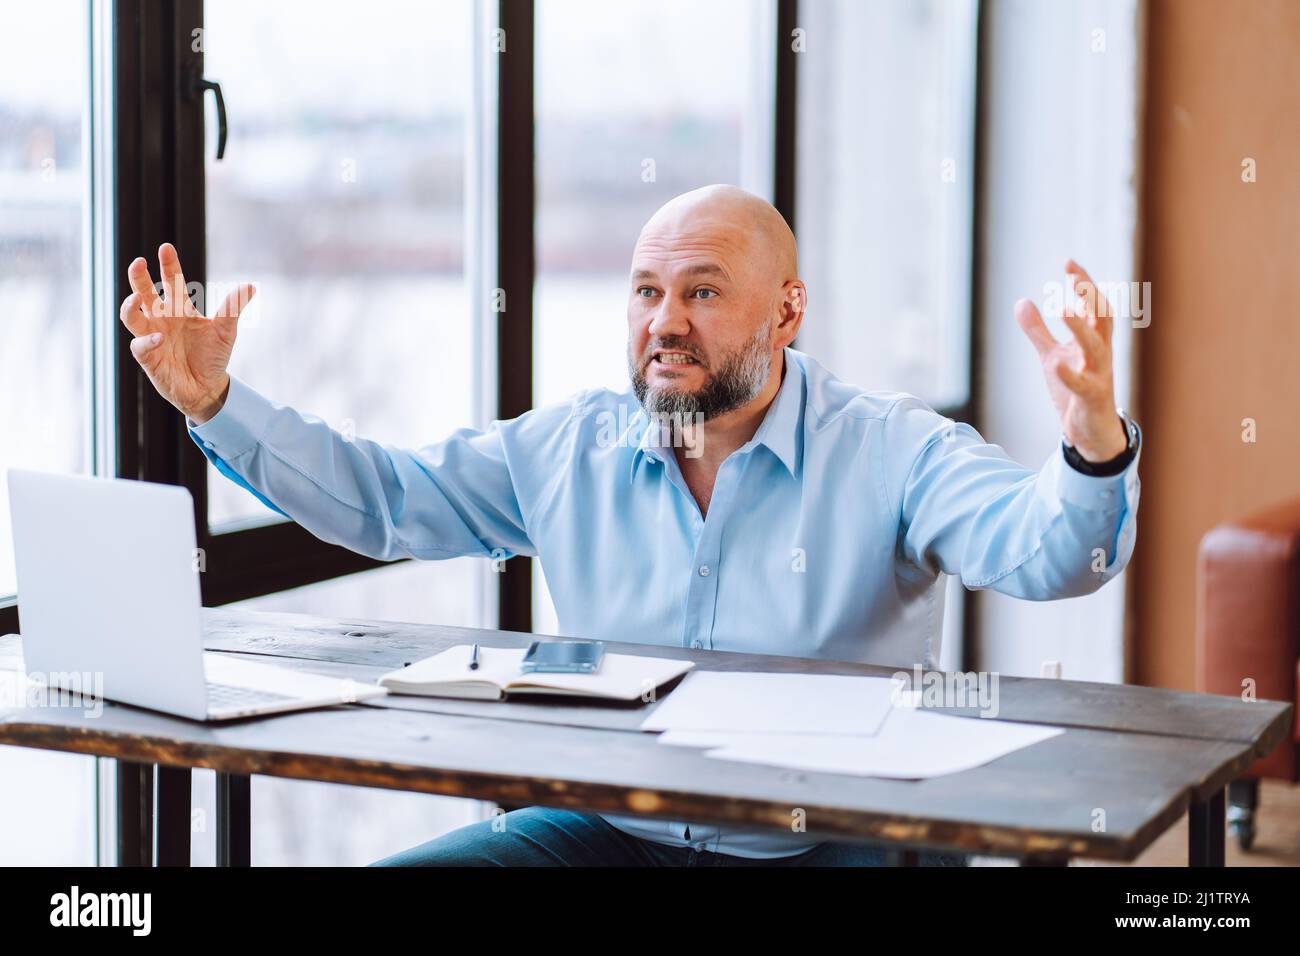 Portrait of angry annoyed middle-aged bald man wearing blue shirt sitting at wooden desk near document laptop in office. Stock Photo